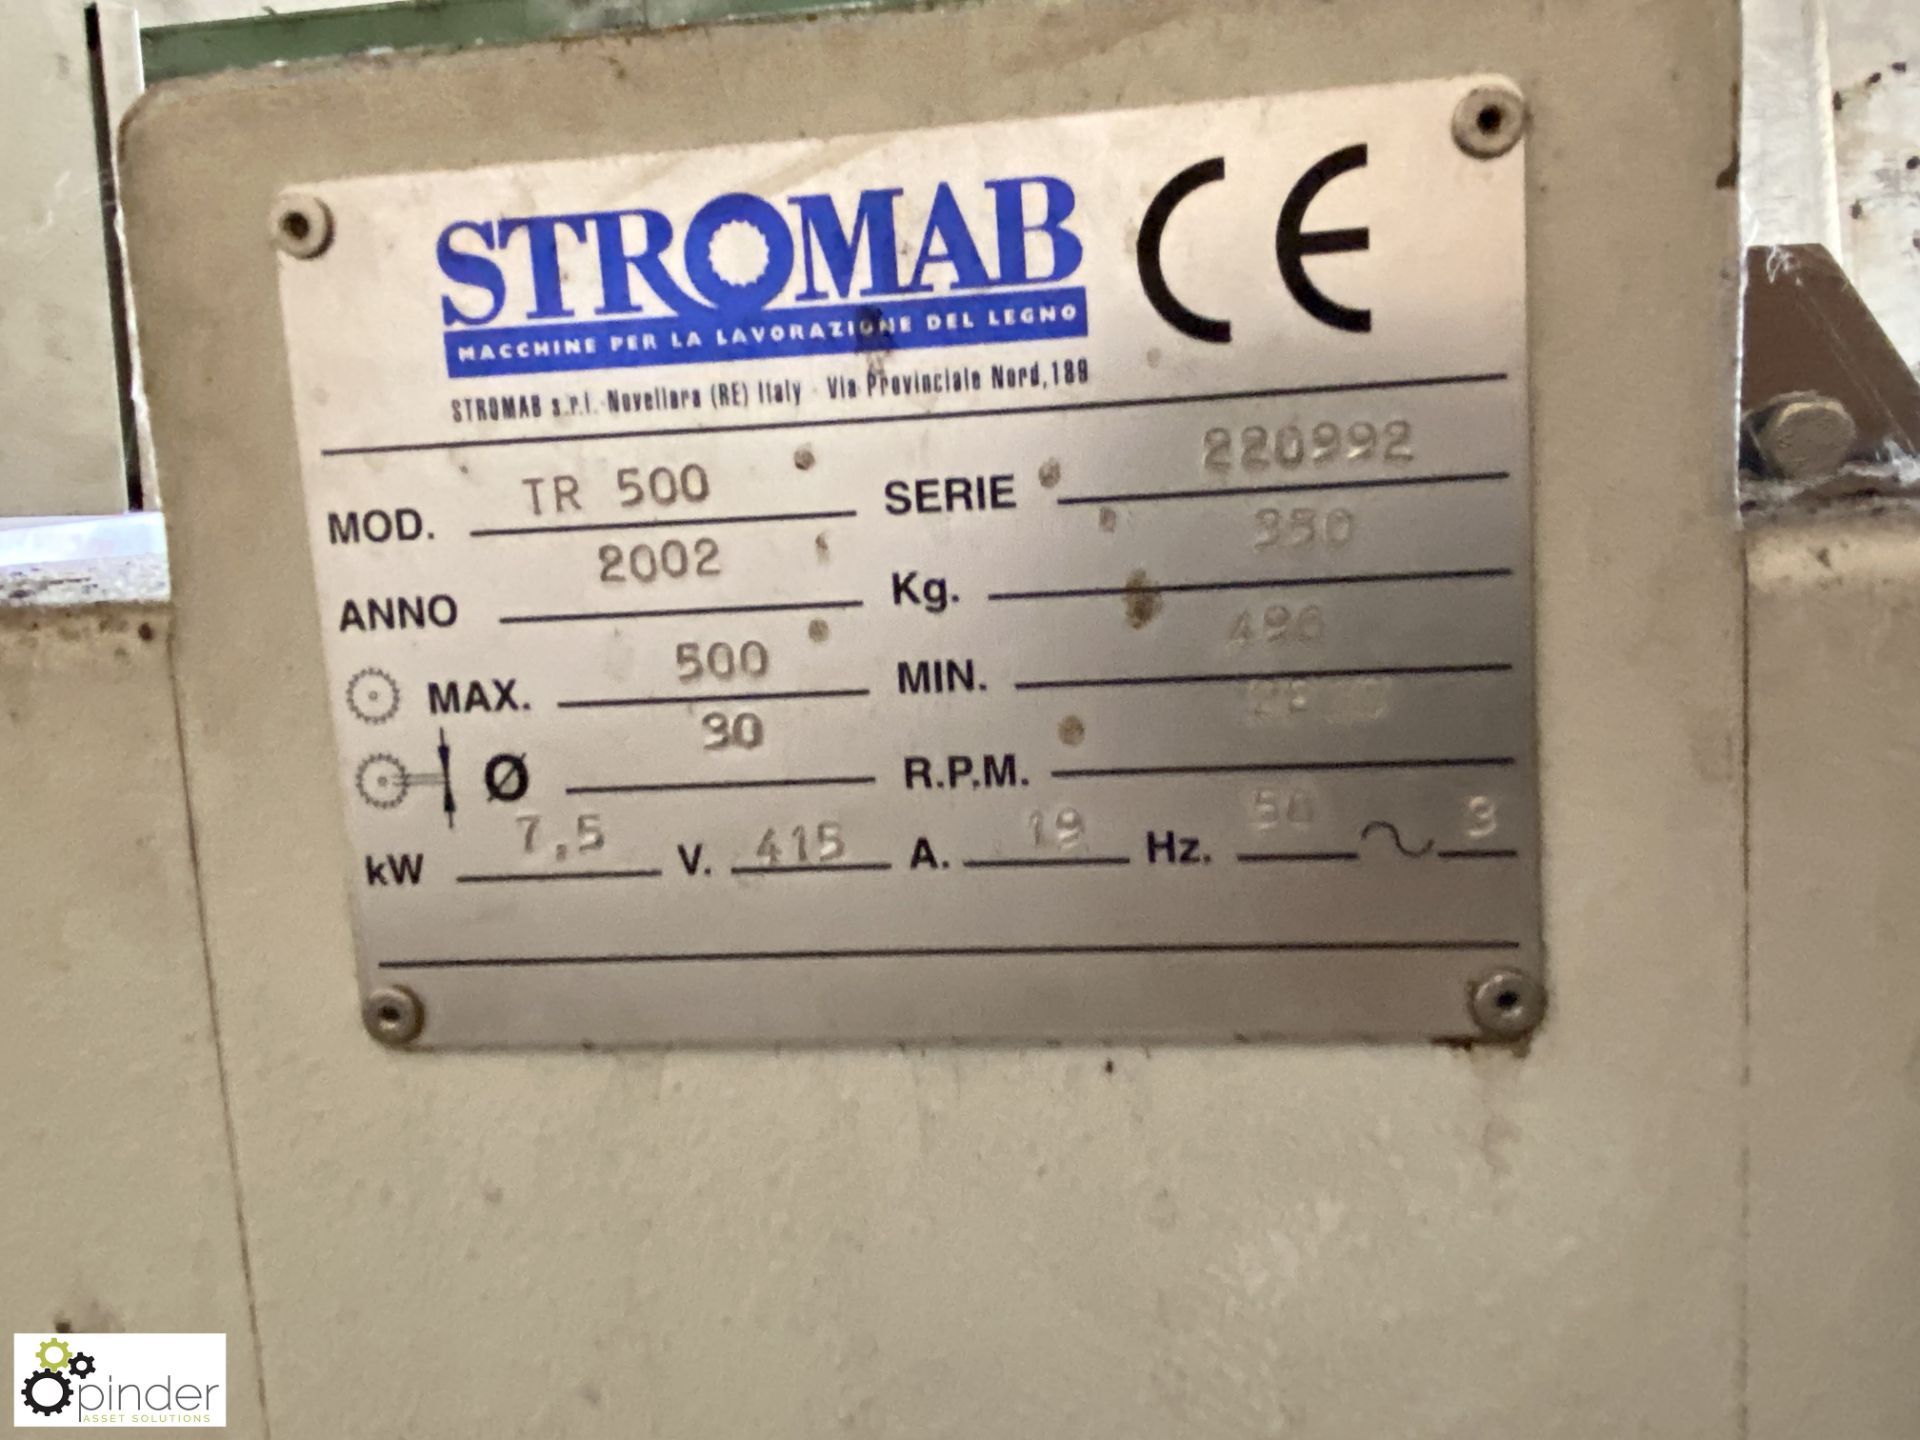 Stromab TR500 Programmable Cut Off Saw, year 2002, serial number 220992, 415volts, with feed table - Image 7 of 12